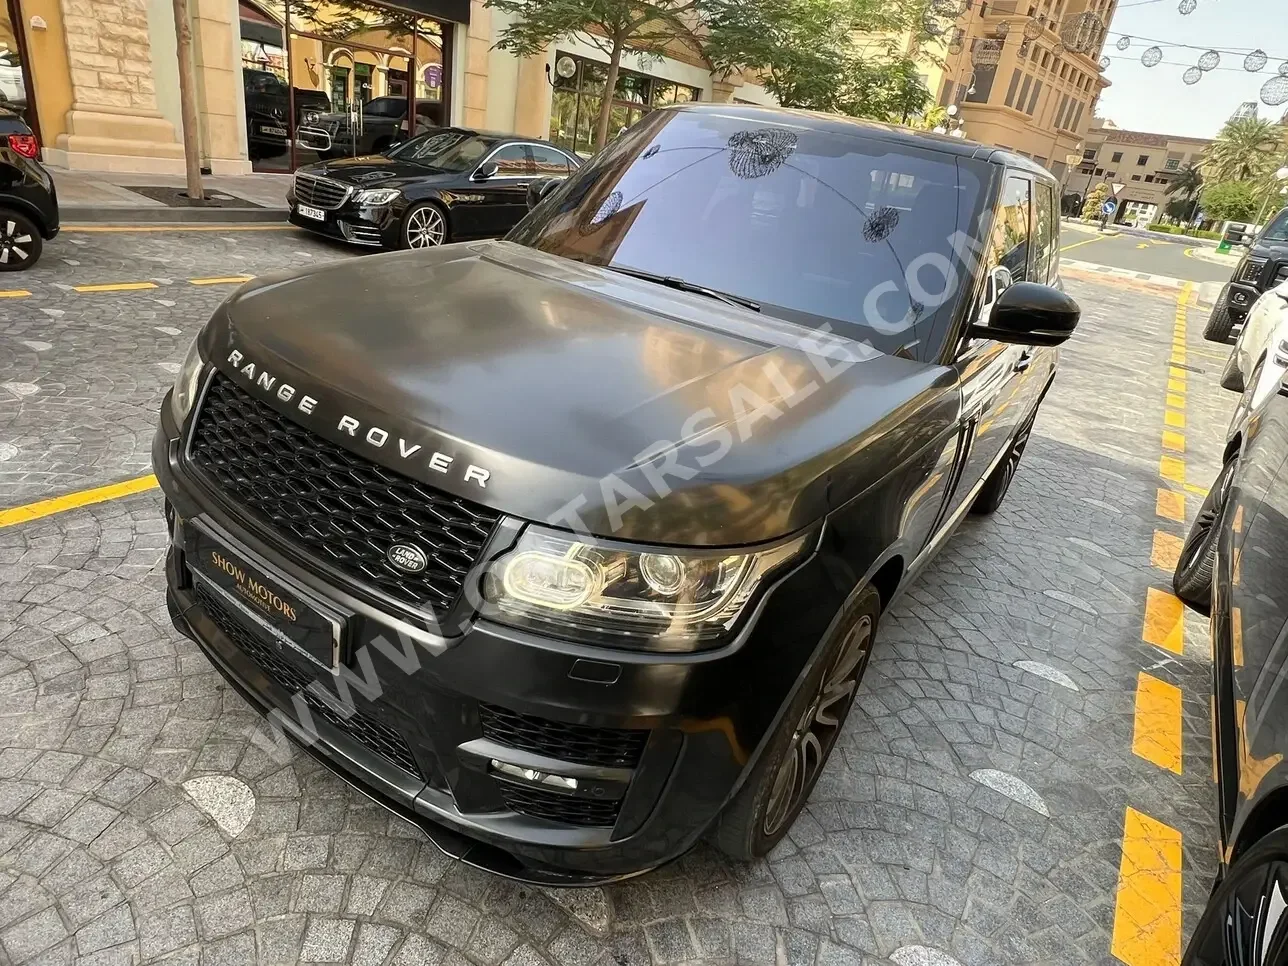 Land Rover  Range Rover  Vogue Super charged  2017  Automatic  125,000 Km  8 Cylinder  Four Wheel Drive (4WD)  SUV  Black